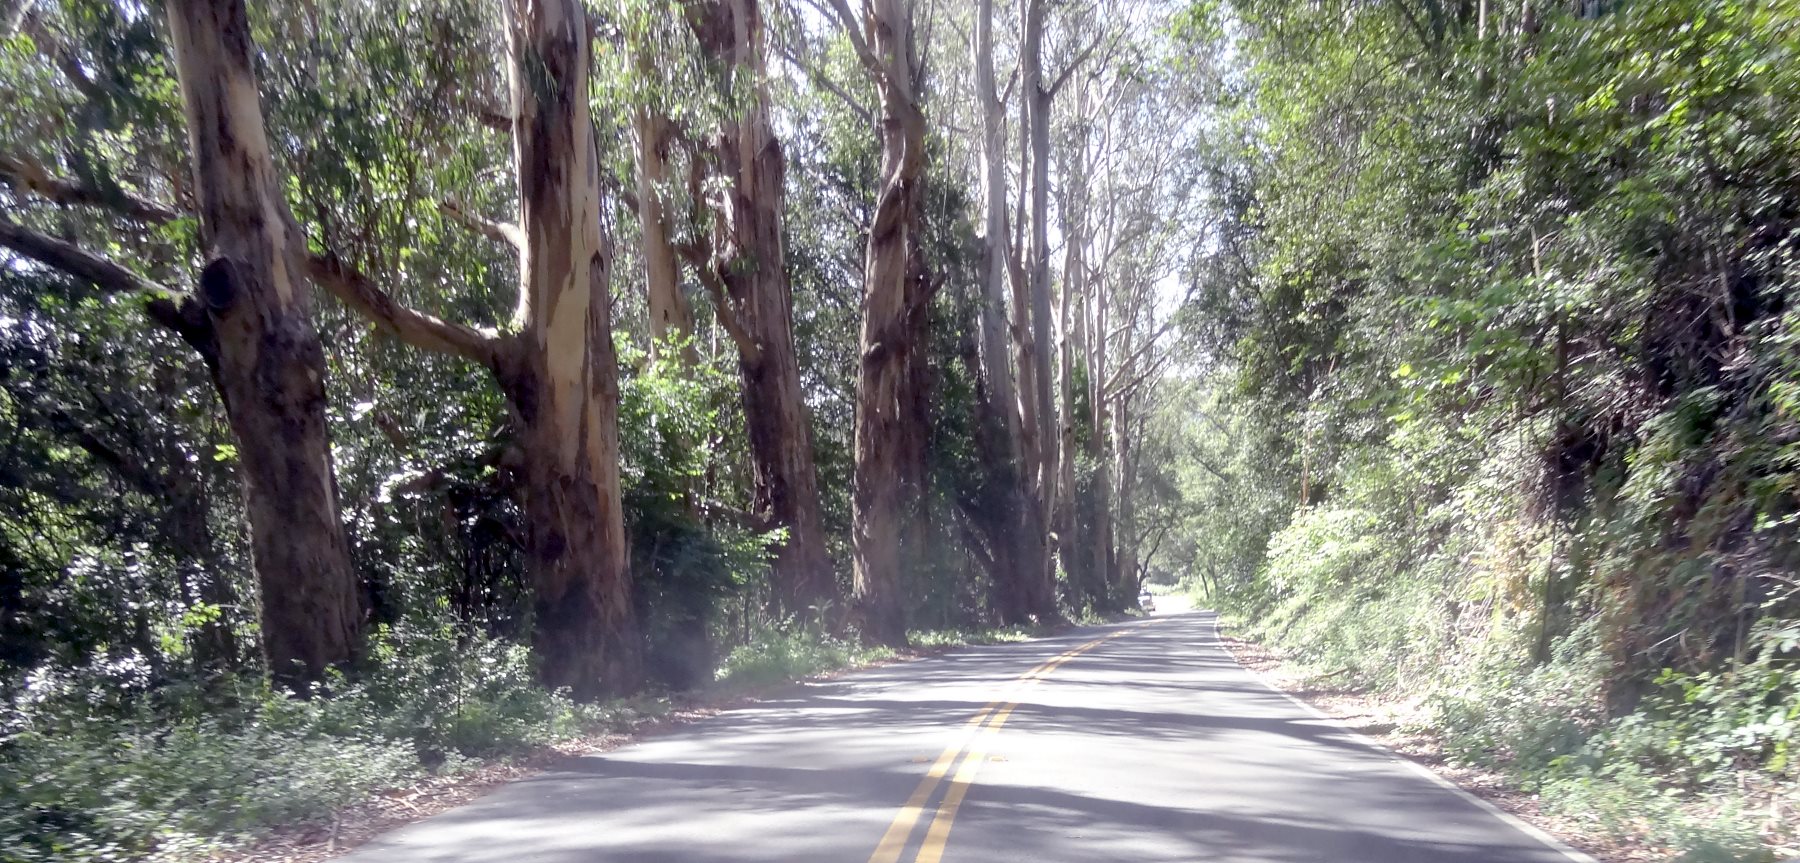 There are huge Eucalyptus trees. They need less water than most of the locals, except the Oaks.